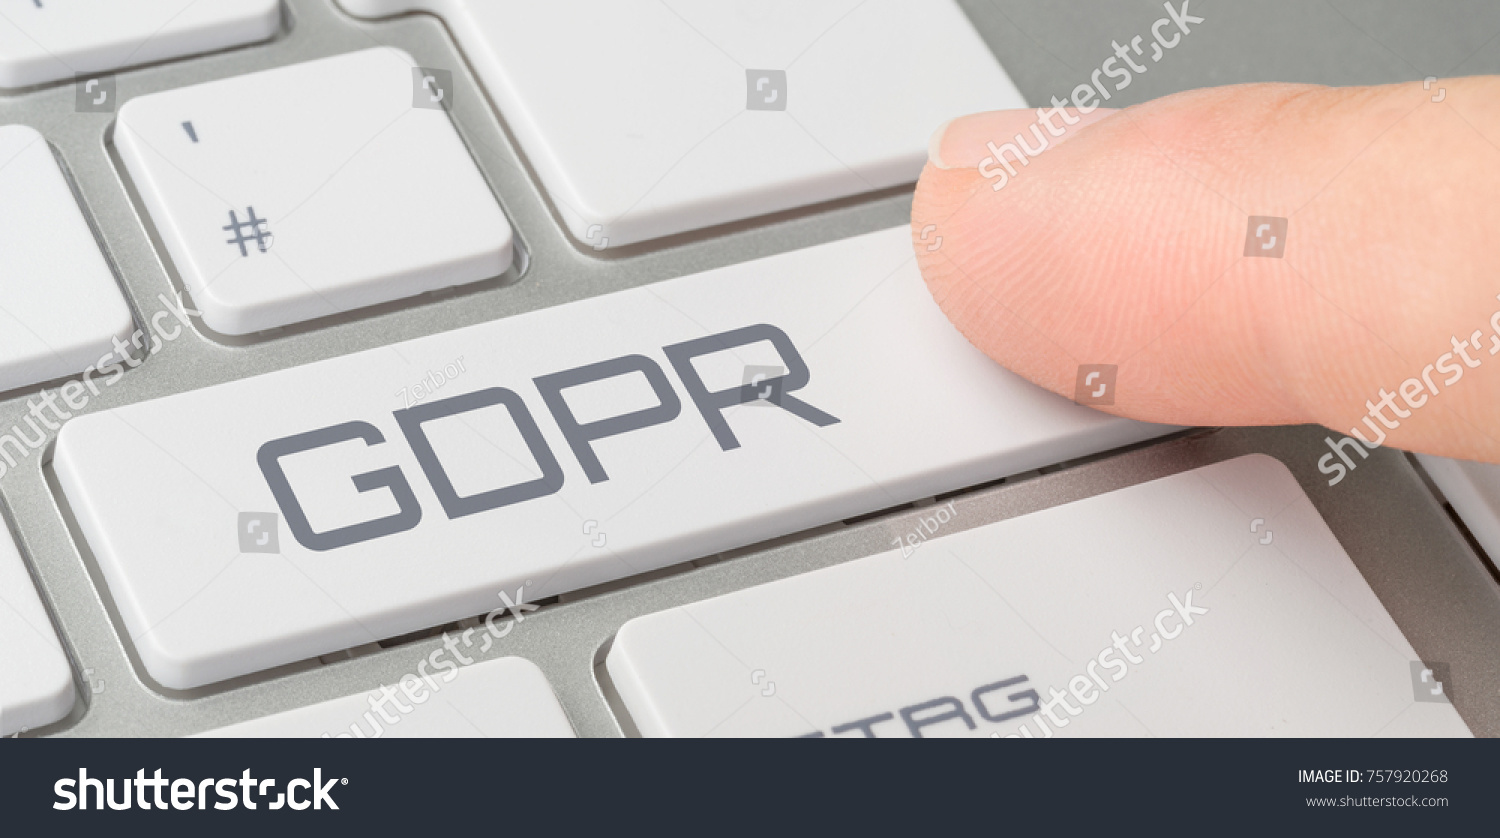 A keyboard with a labeled button - GDPR #757920268